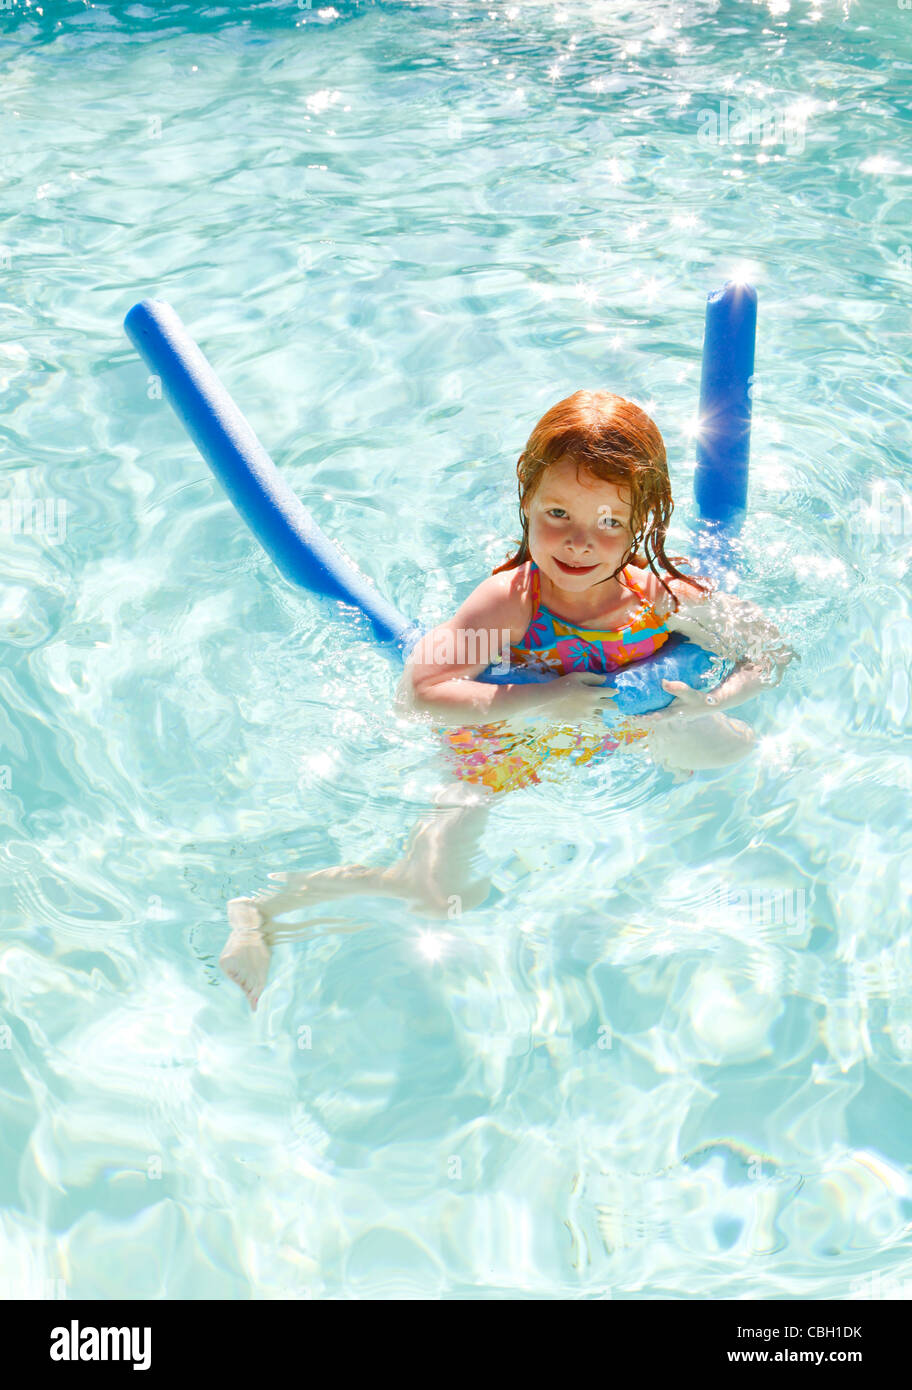 Red haired, young girl, aged 5, swimming in a swimming pool on a summer holiday. Using a float to aid swimming. Stock Photo